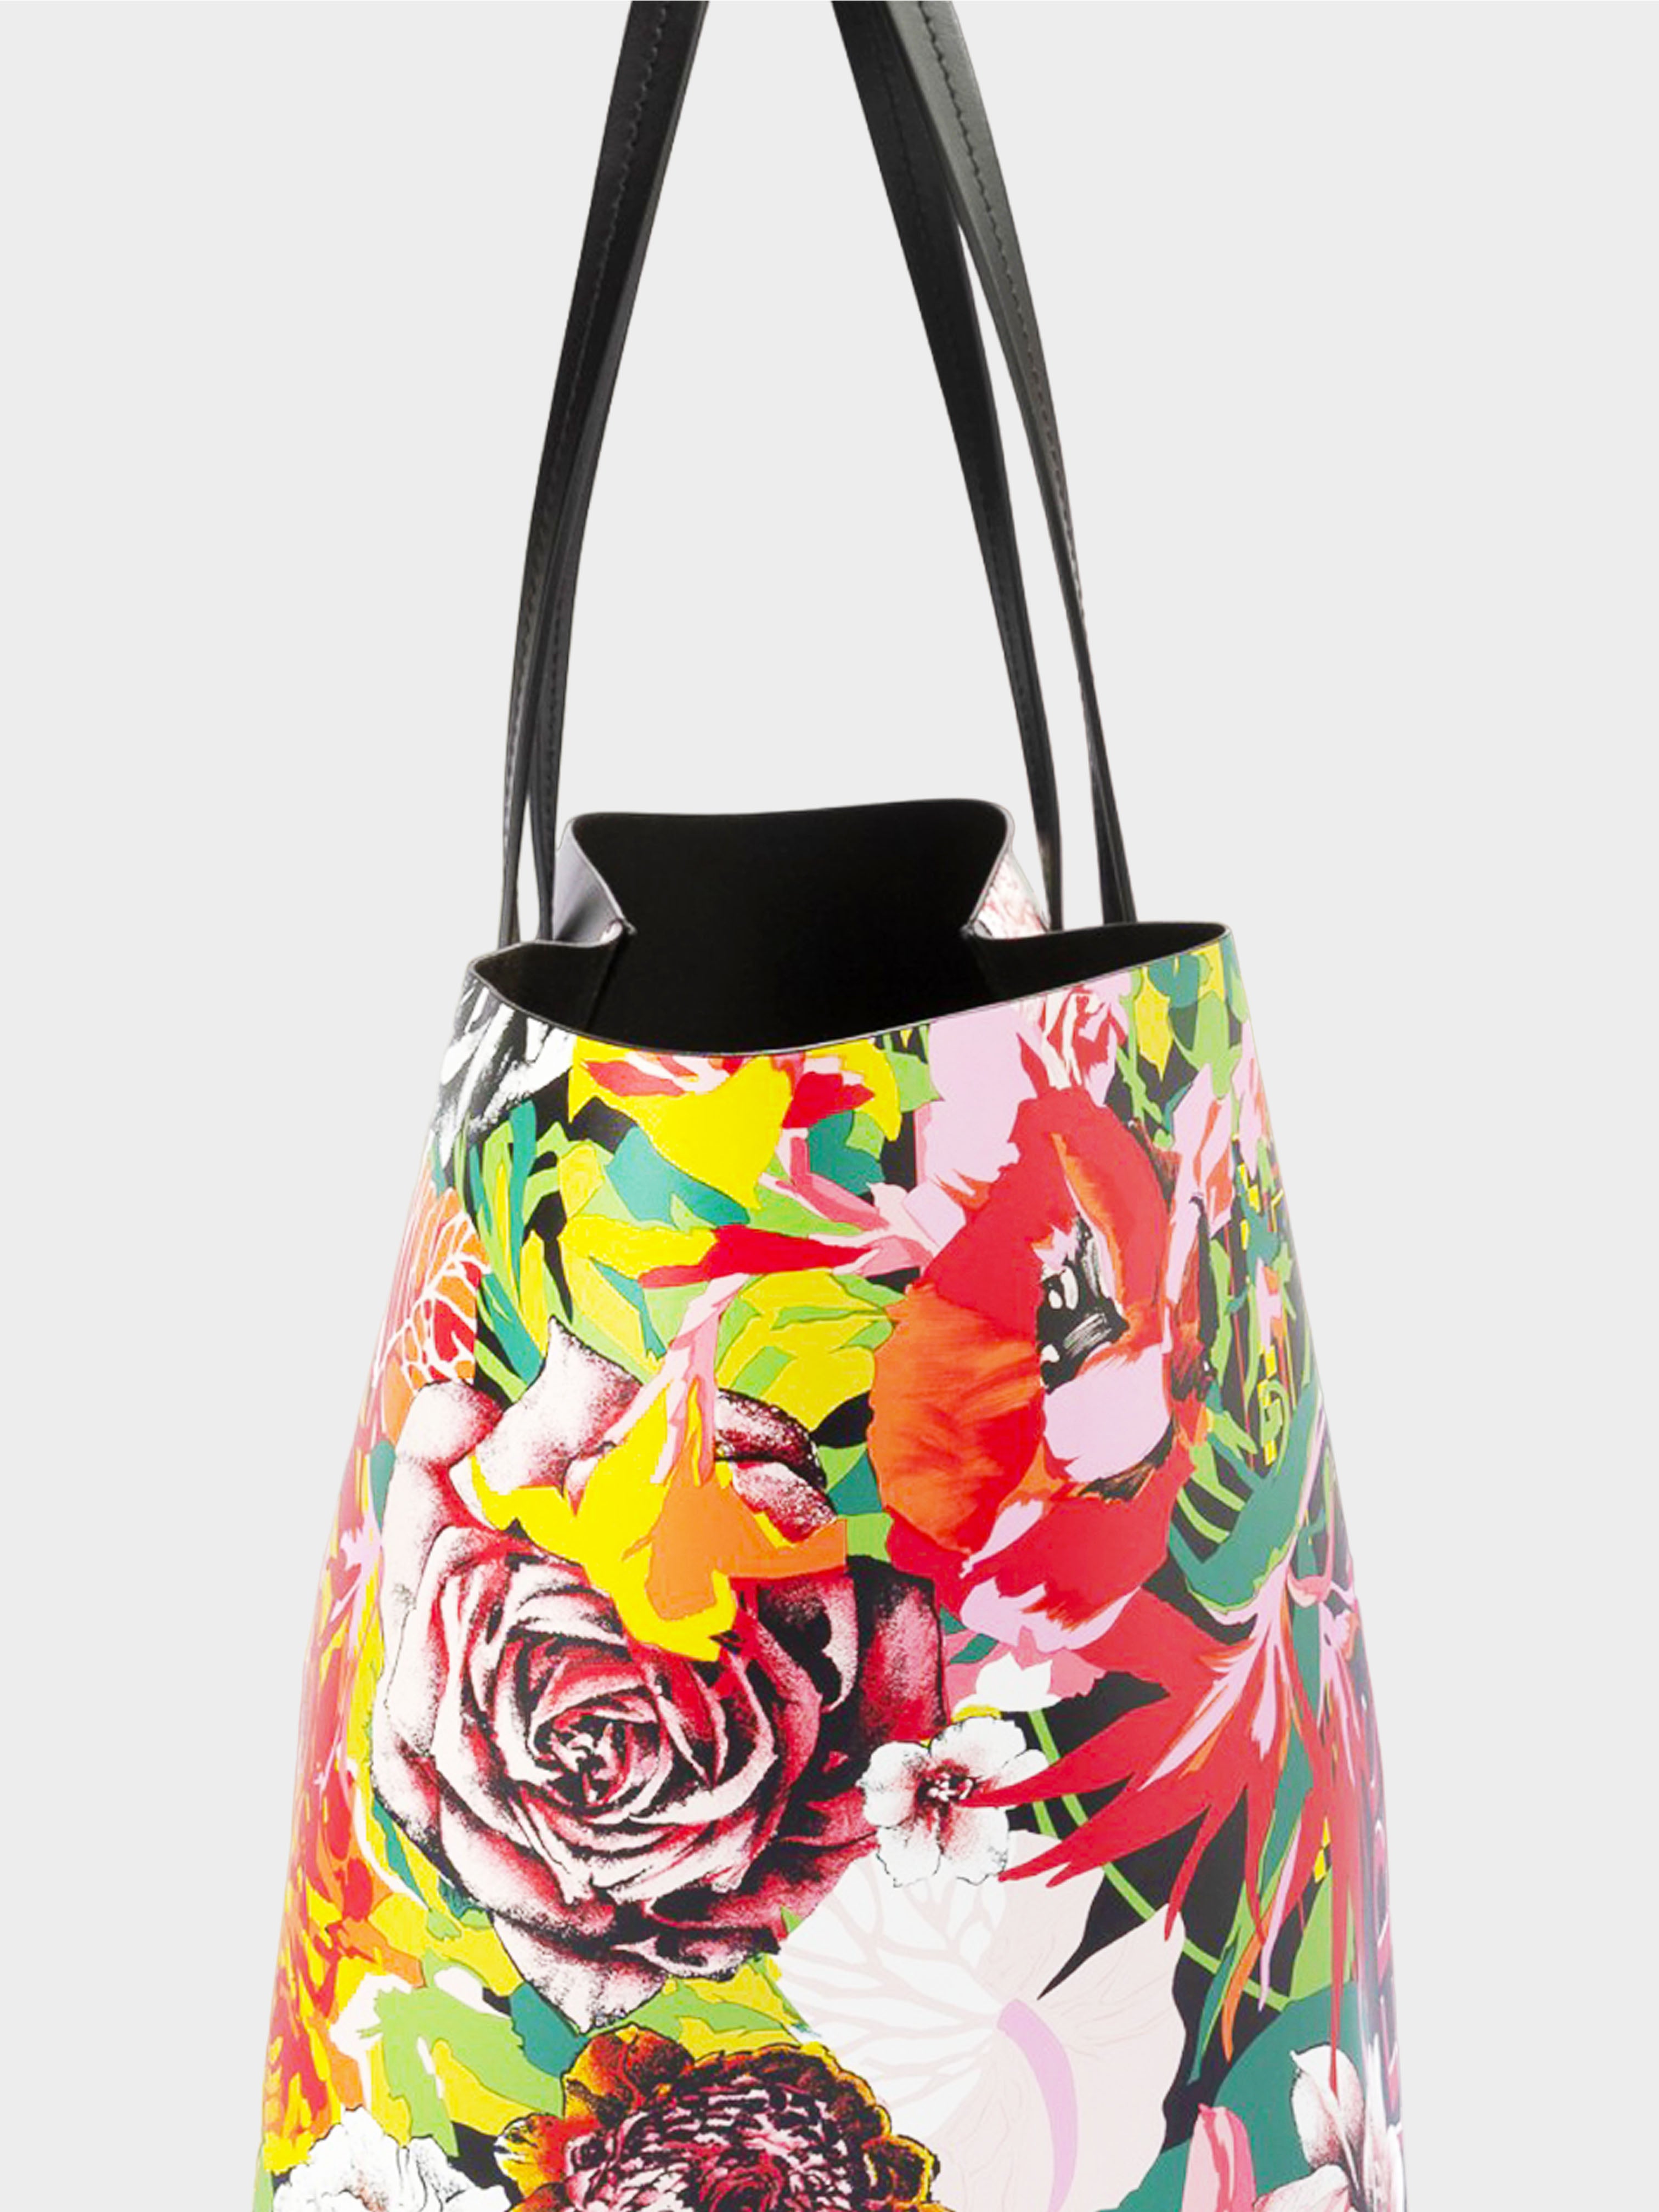 Versace 2010s Black Soft Leather Floral Tote